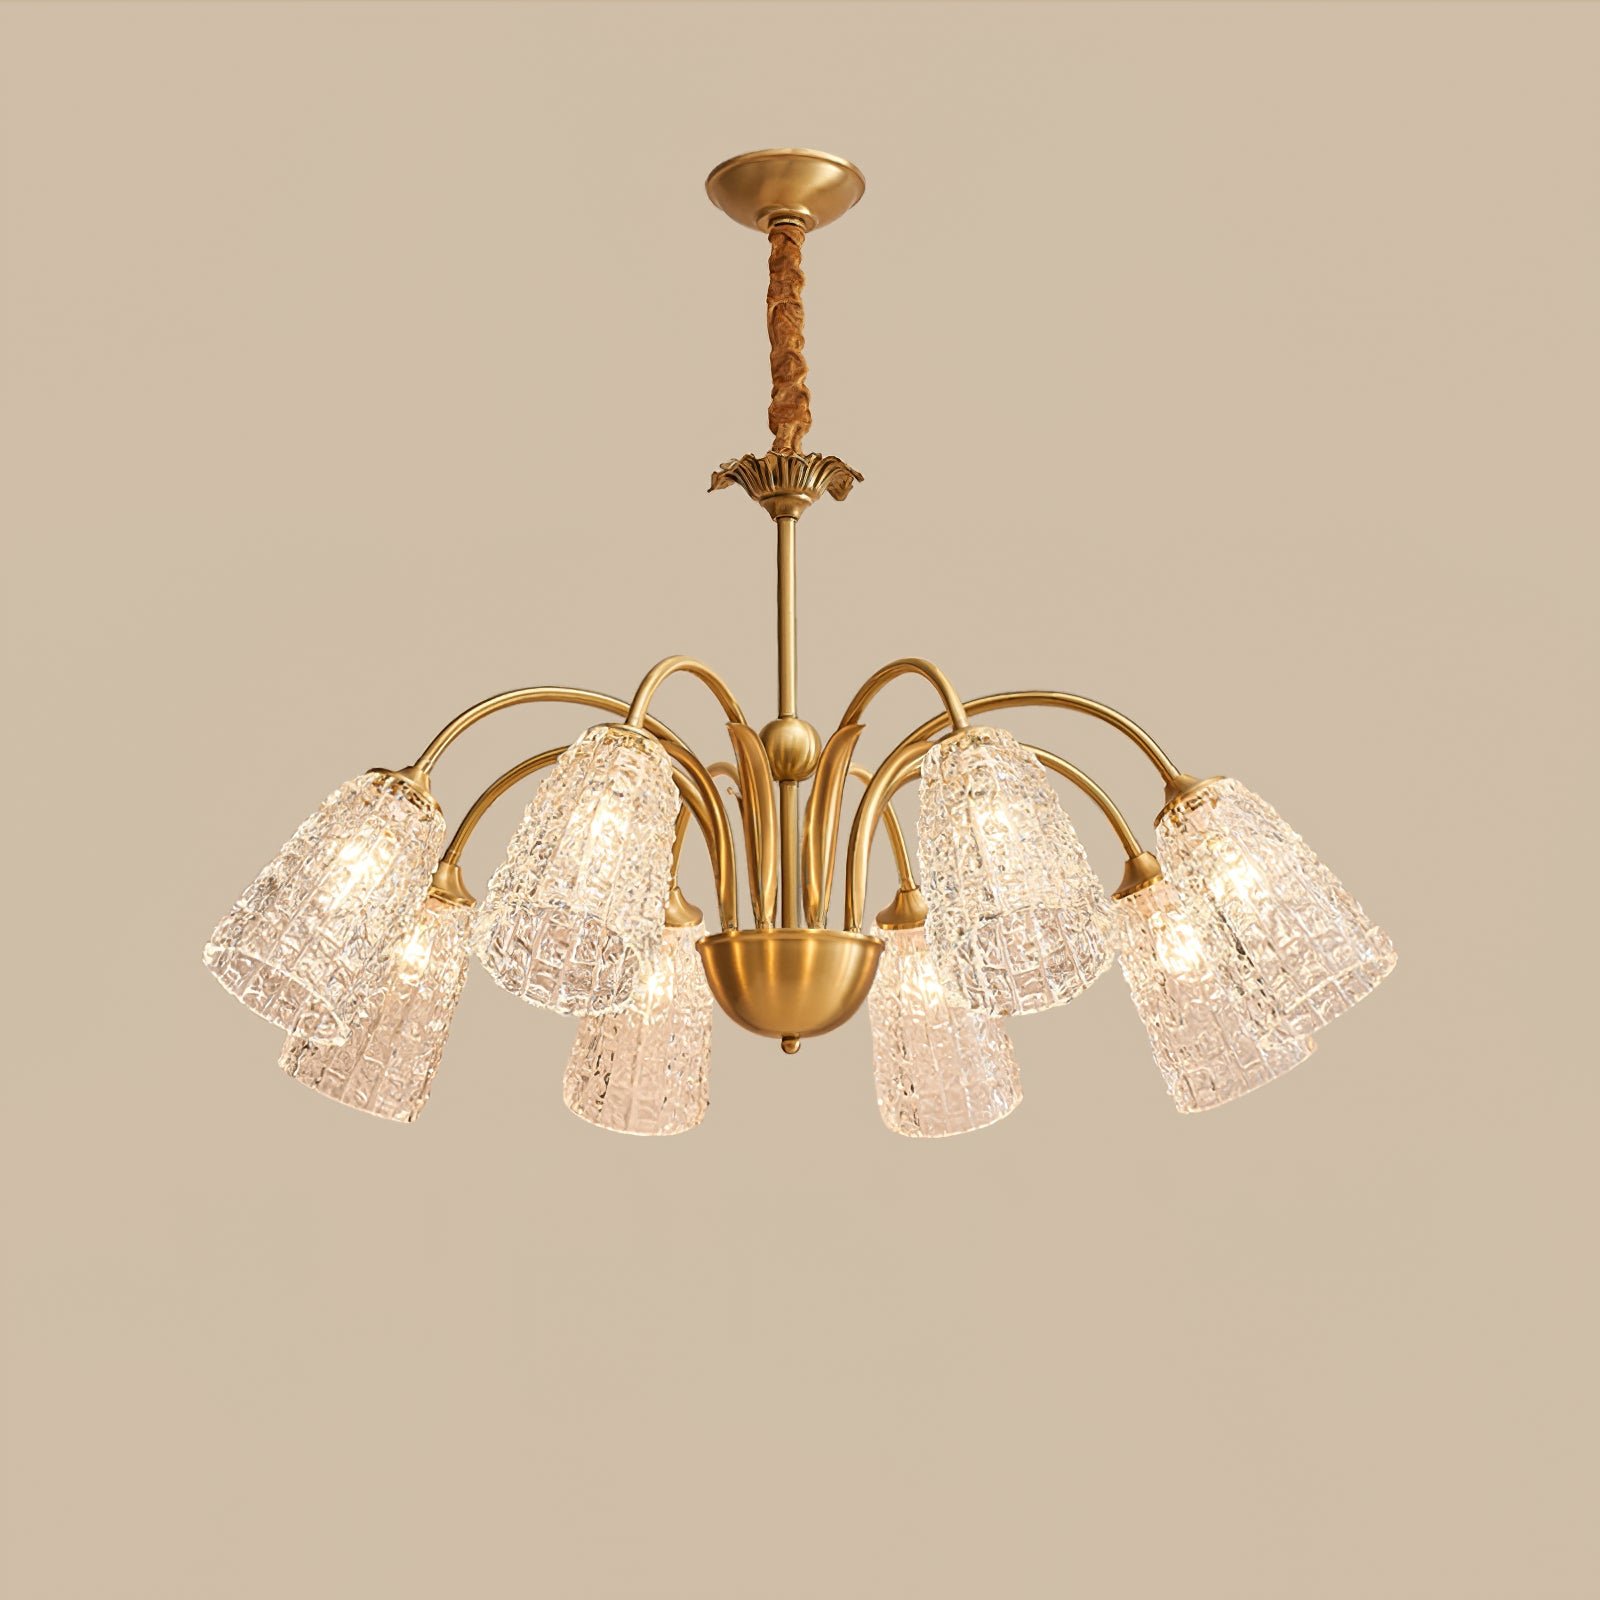 8-Head Nikoll Chandelier: Dimensions of 35 inches in diameter and 15.3 inches in height (or 89cm x 39cm). Made of Brass with a Clear finish.